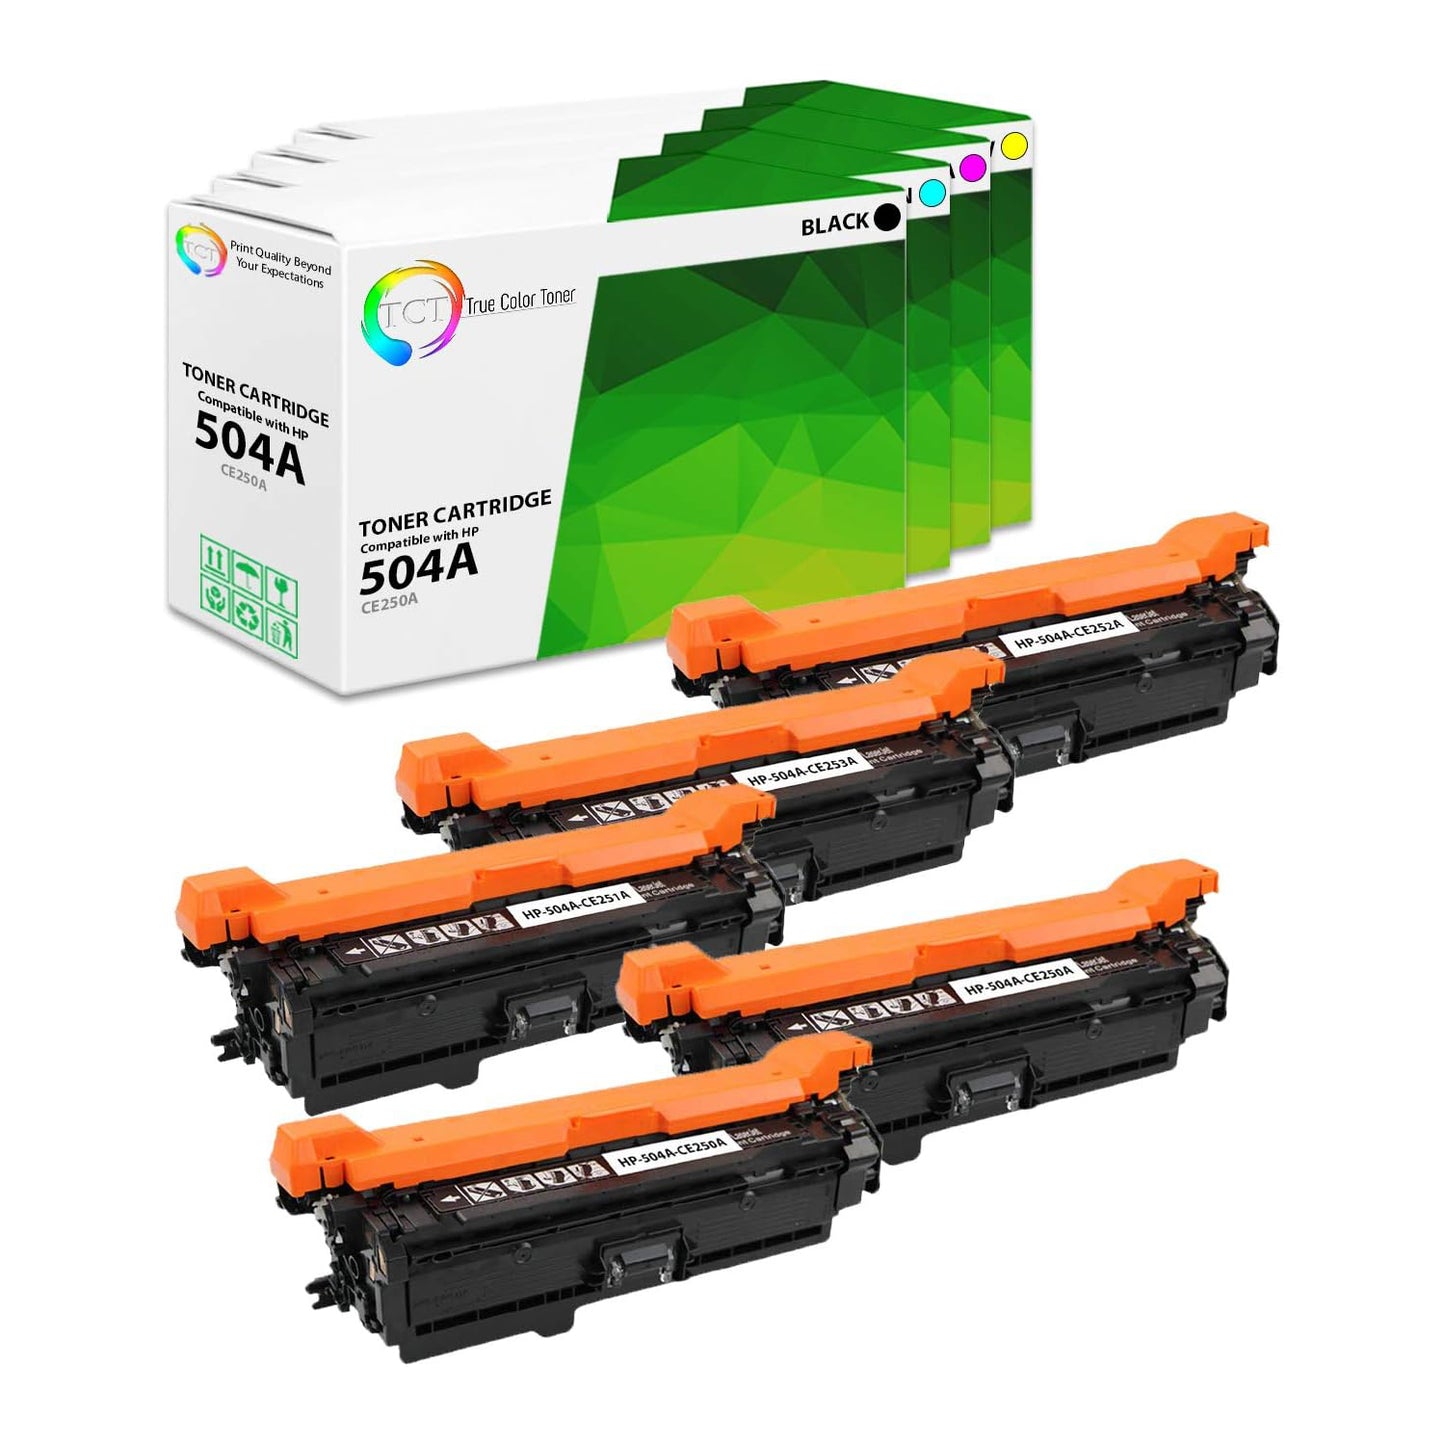 TCT Compatible Toner Cartridge Replacement for the HP 504A Series - 5 Pack (BK, C, M, Y)